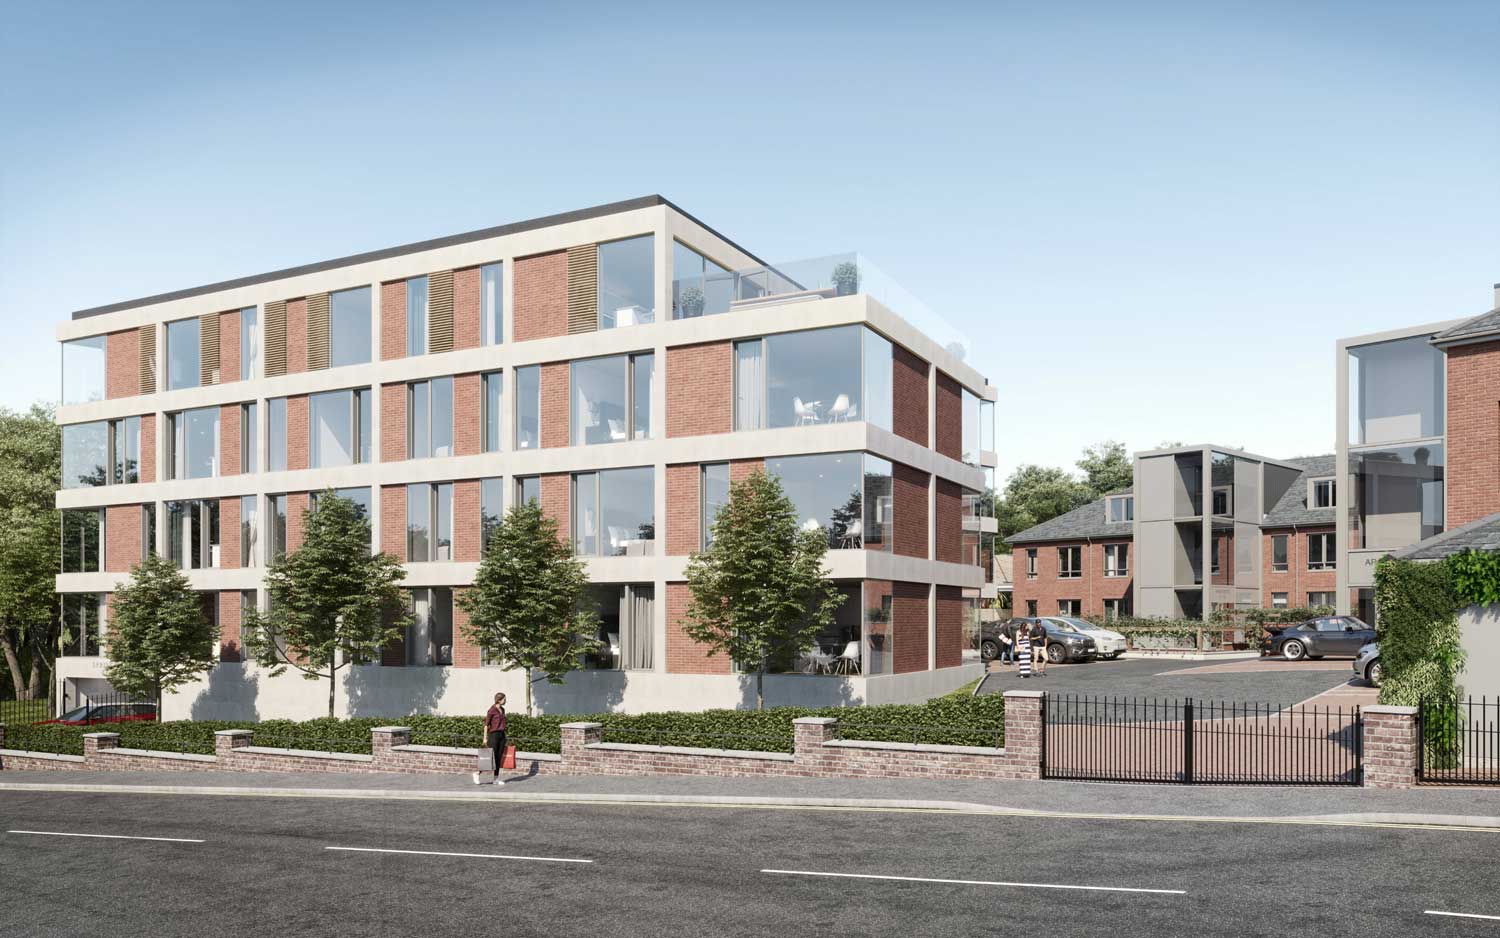 Newby secures planning approval to expand Springfield Court residential development in Harrogate